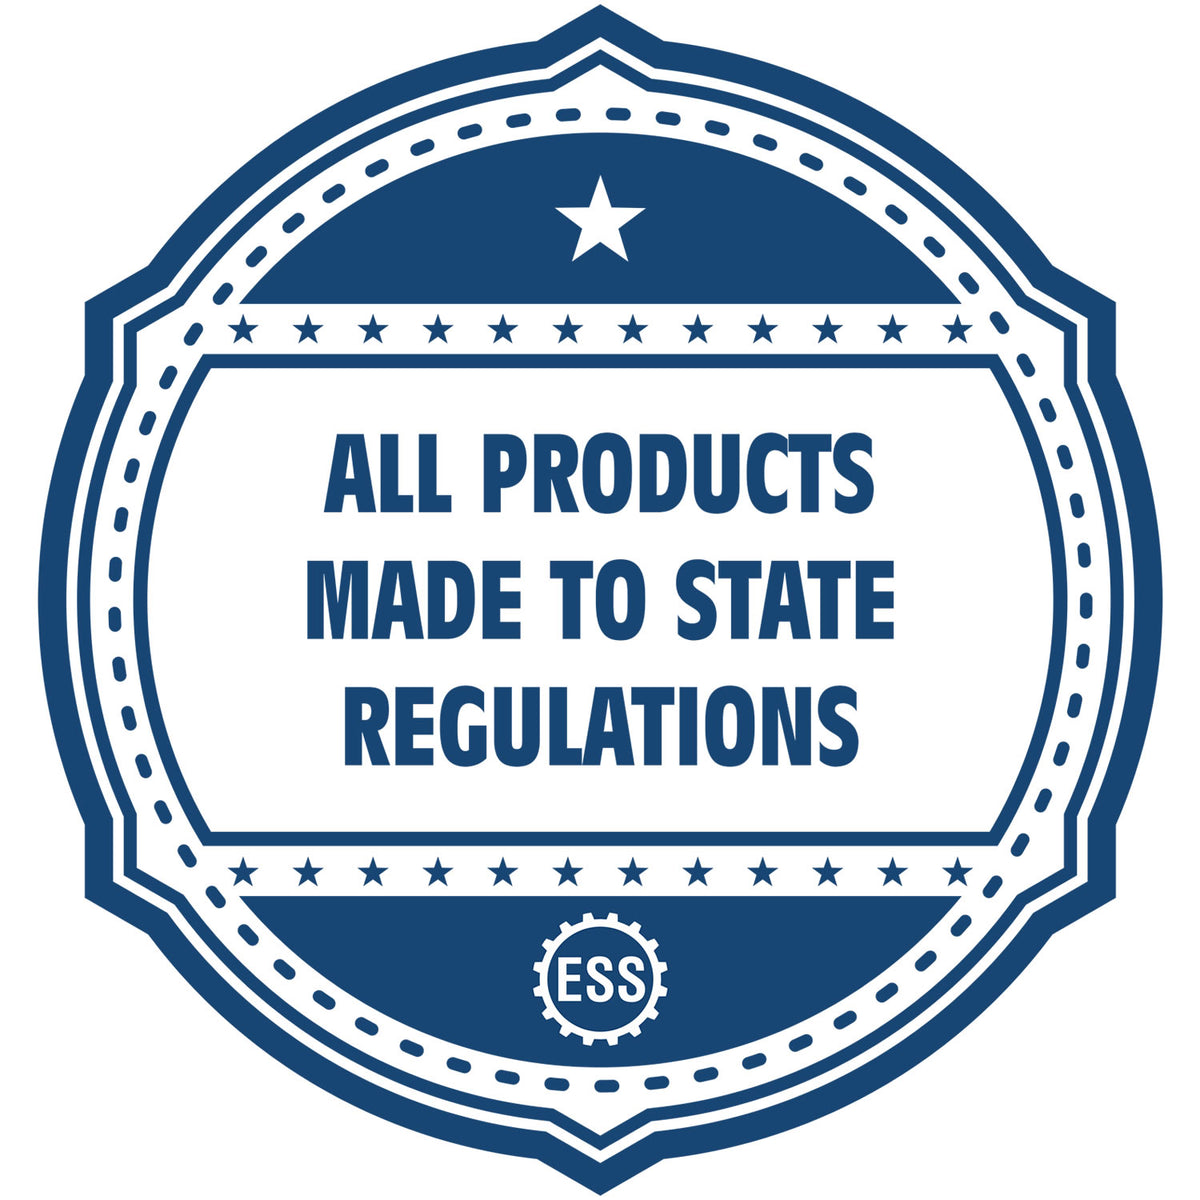 An icon or badge element for the Slim Pre-Inked Kansas Landscape Architect Seal Stamp showing that this product is made in compliance with state regulations.